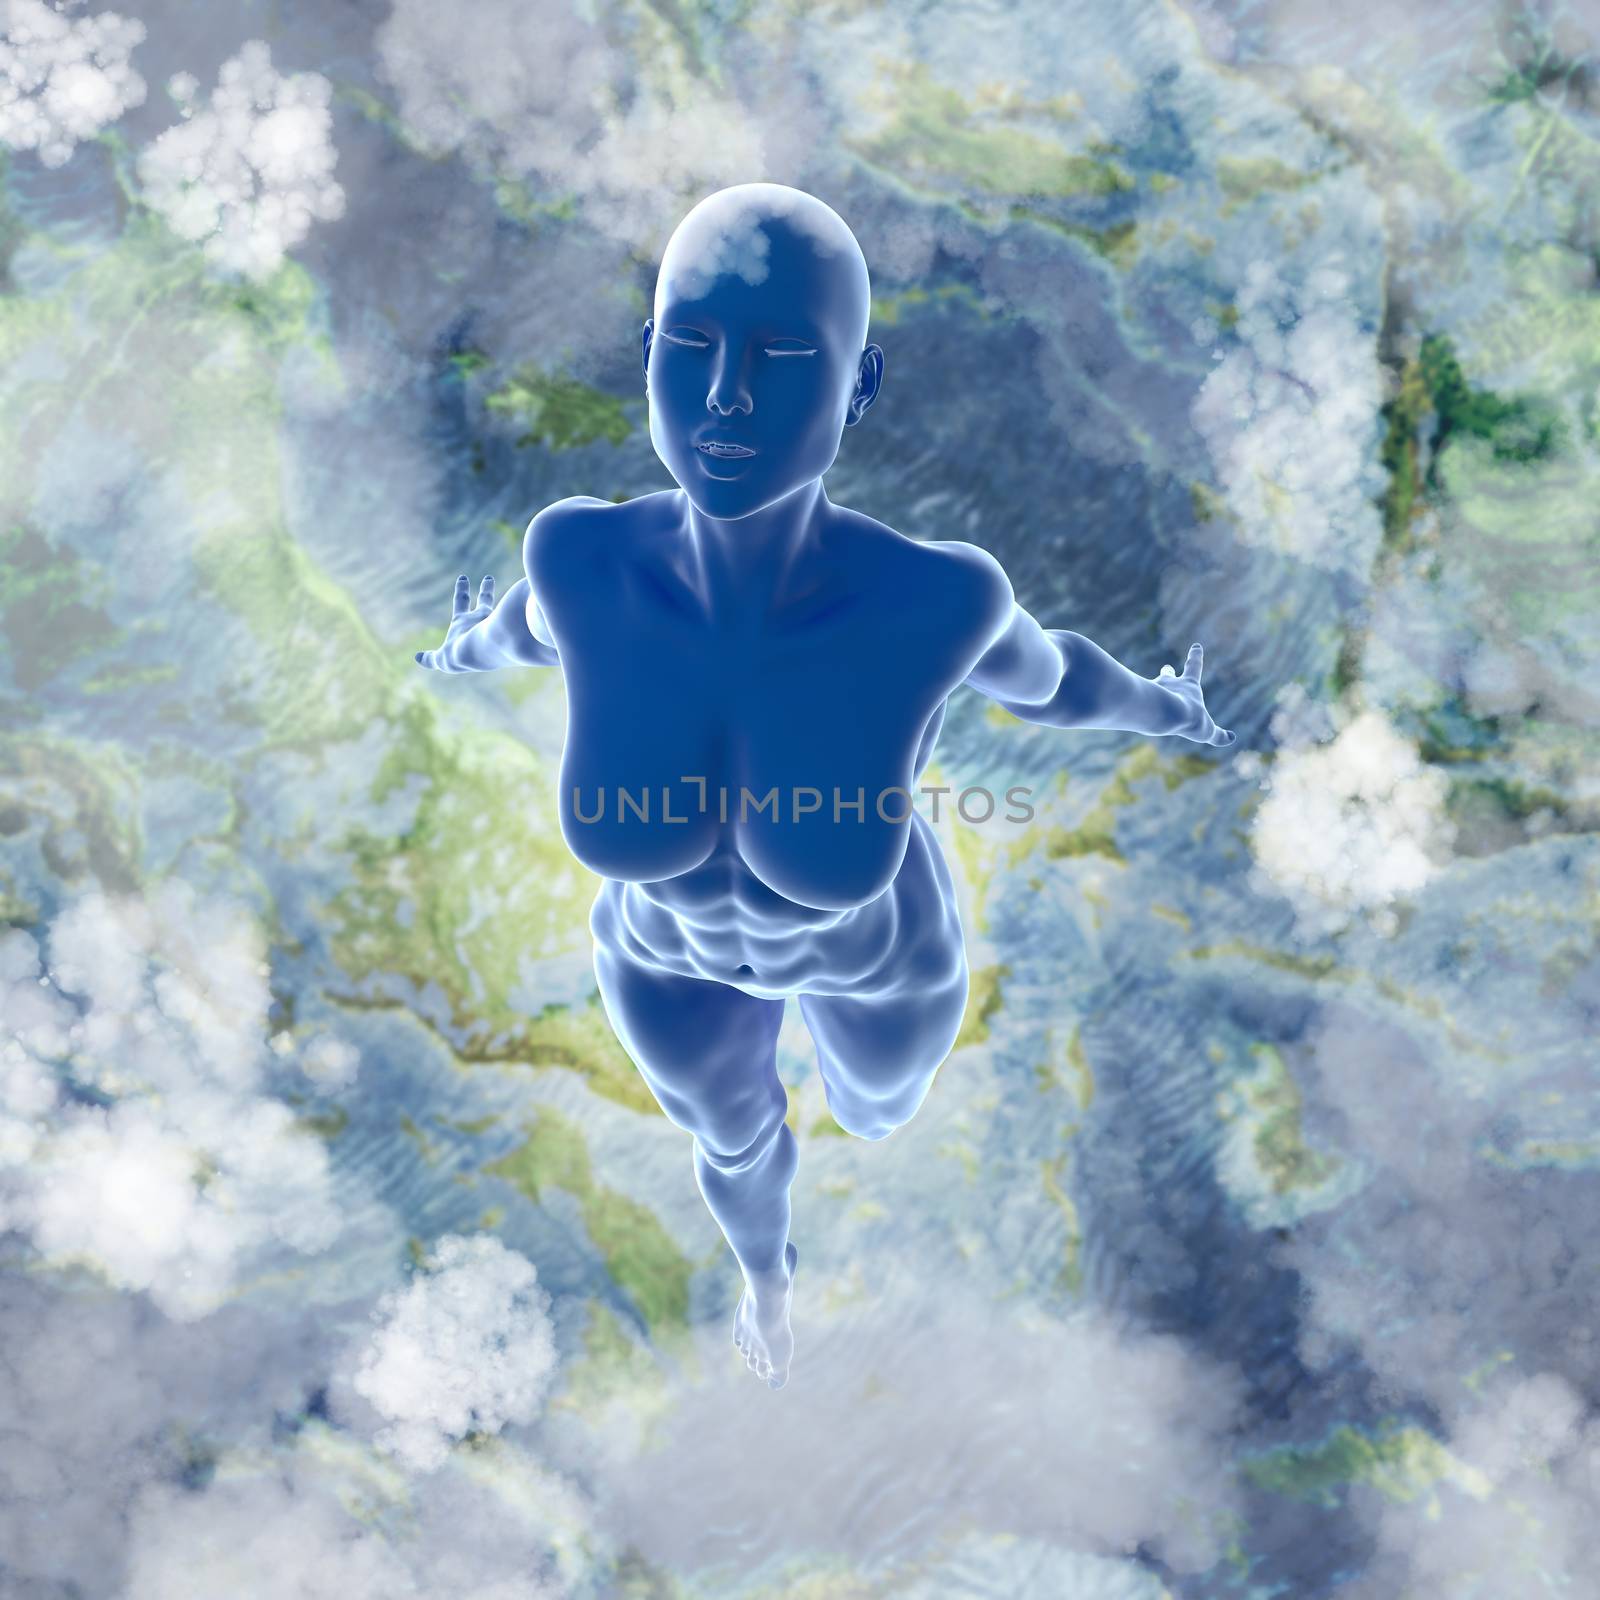 Slim attractive sportswoman flying in the air full of clouds over earth background. Fantasy fairy virtual reality 3d illustration by skrotov